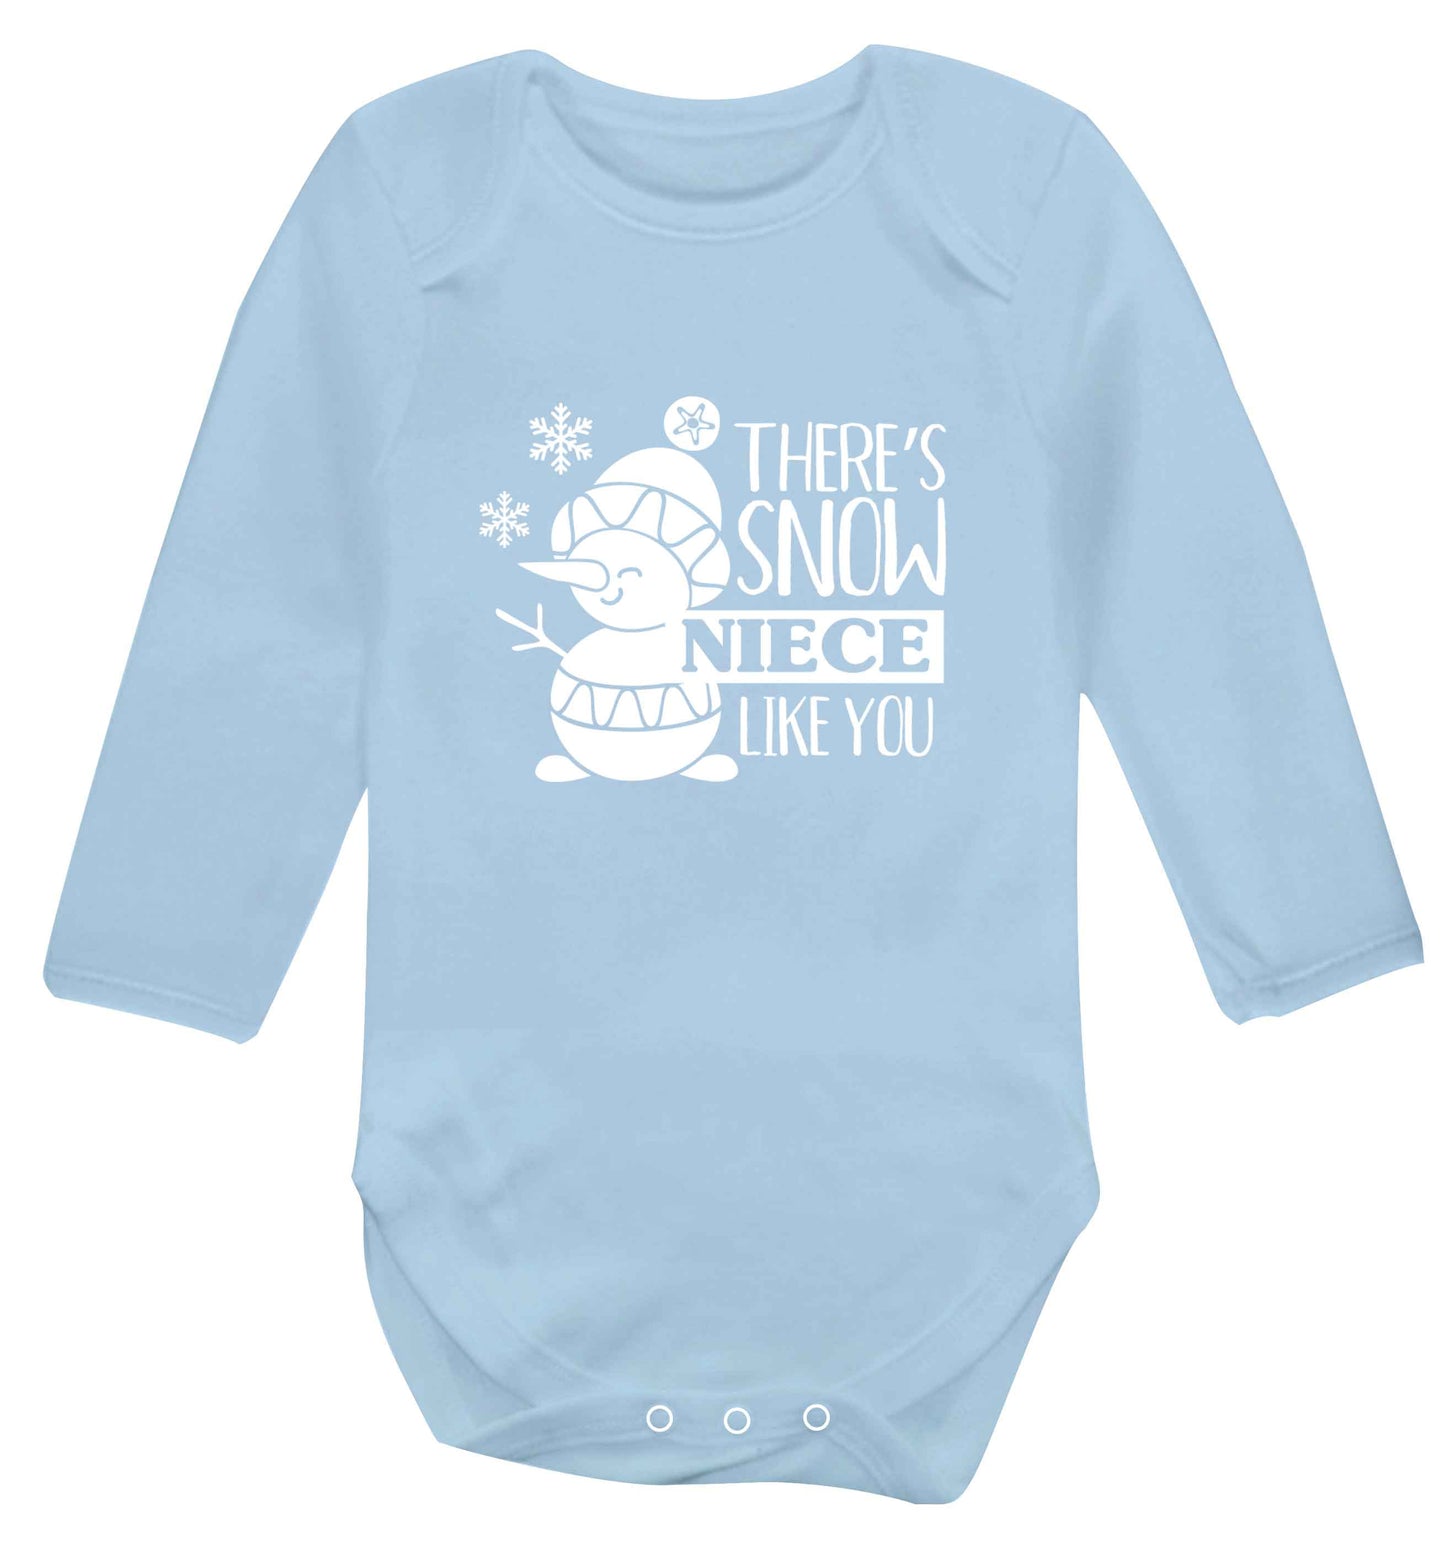 There's snow niece like you baby vest long sleeved pale blue 6-12 months